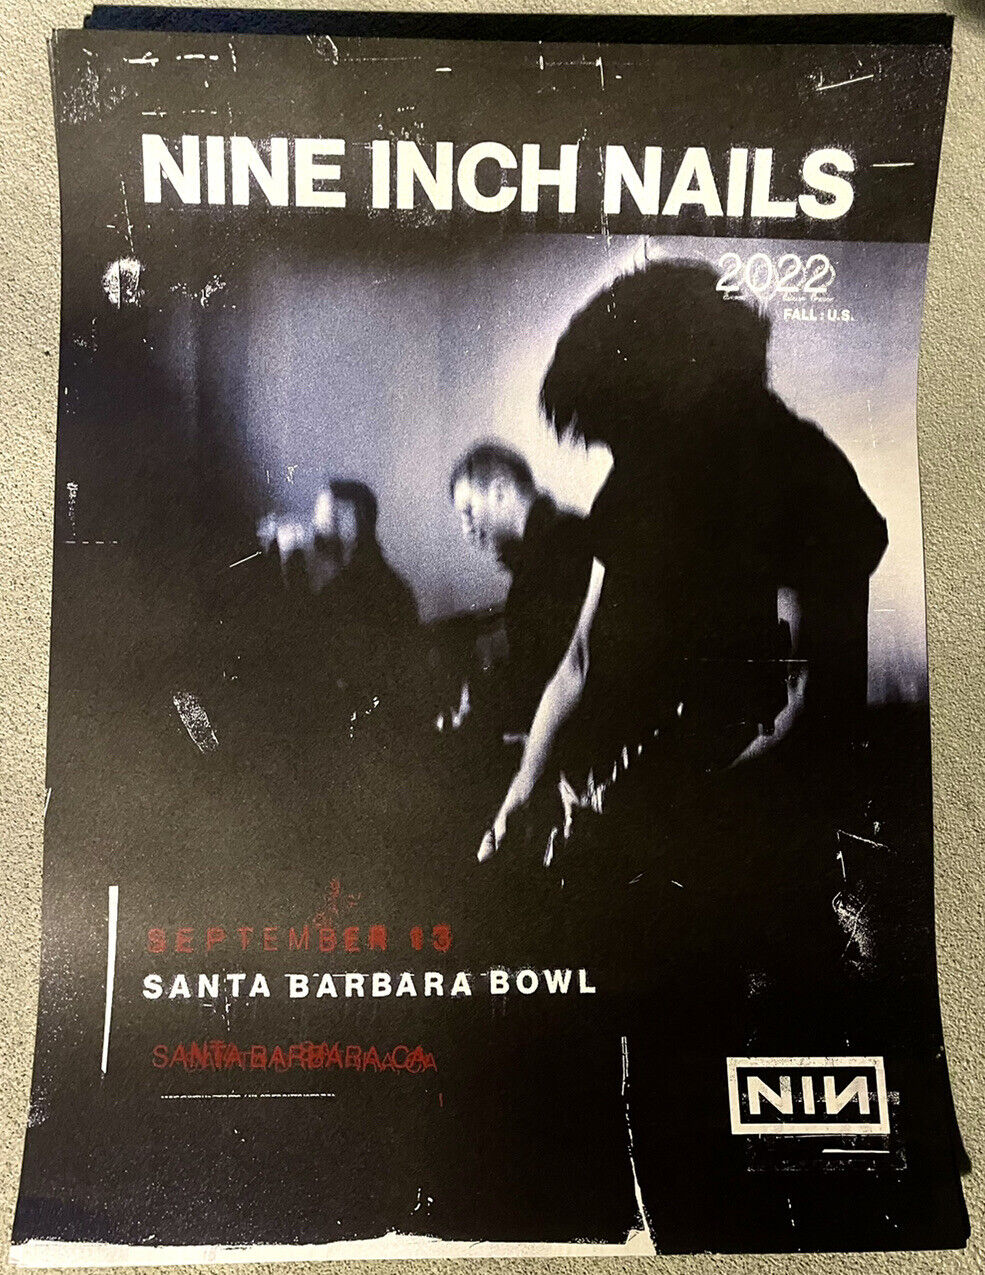 <a href='https://www.ebay.com/sch/i.html?_from=R40&_trksid=p2323012.m570.l1313&_nkw=Nine+Inch+Nails+Poster+Santa Barbara&_sacat=0&mkcid=1&mkrid=711-53200-19255-0&siteid=0&campid=5336302525&customid=poster&toolid=10001&mkevt=1'>Buy this Poster!</a>